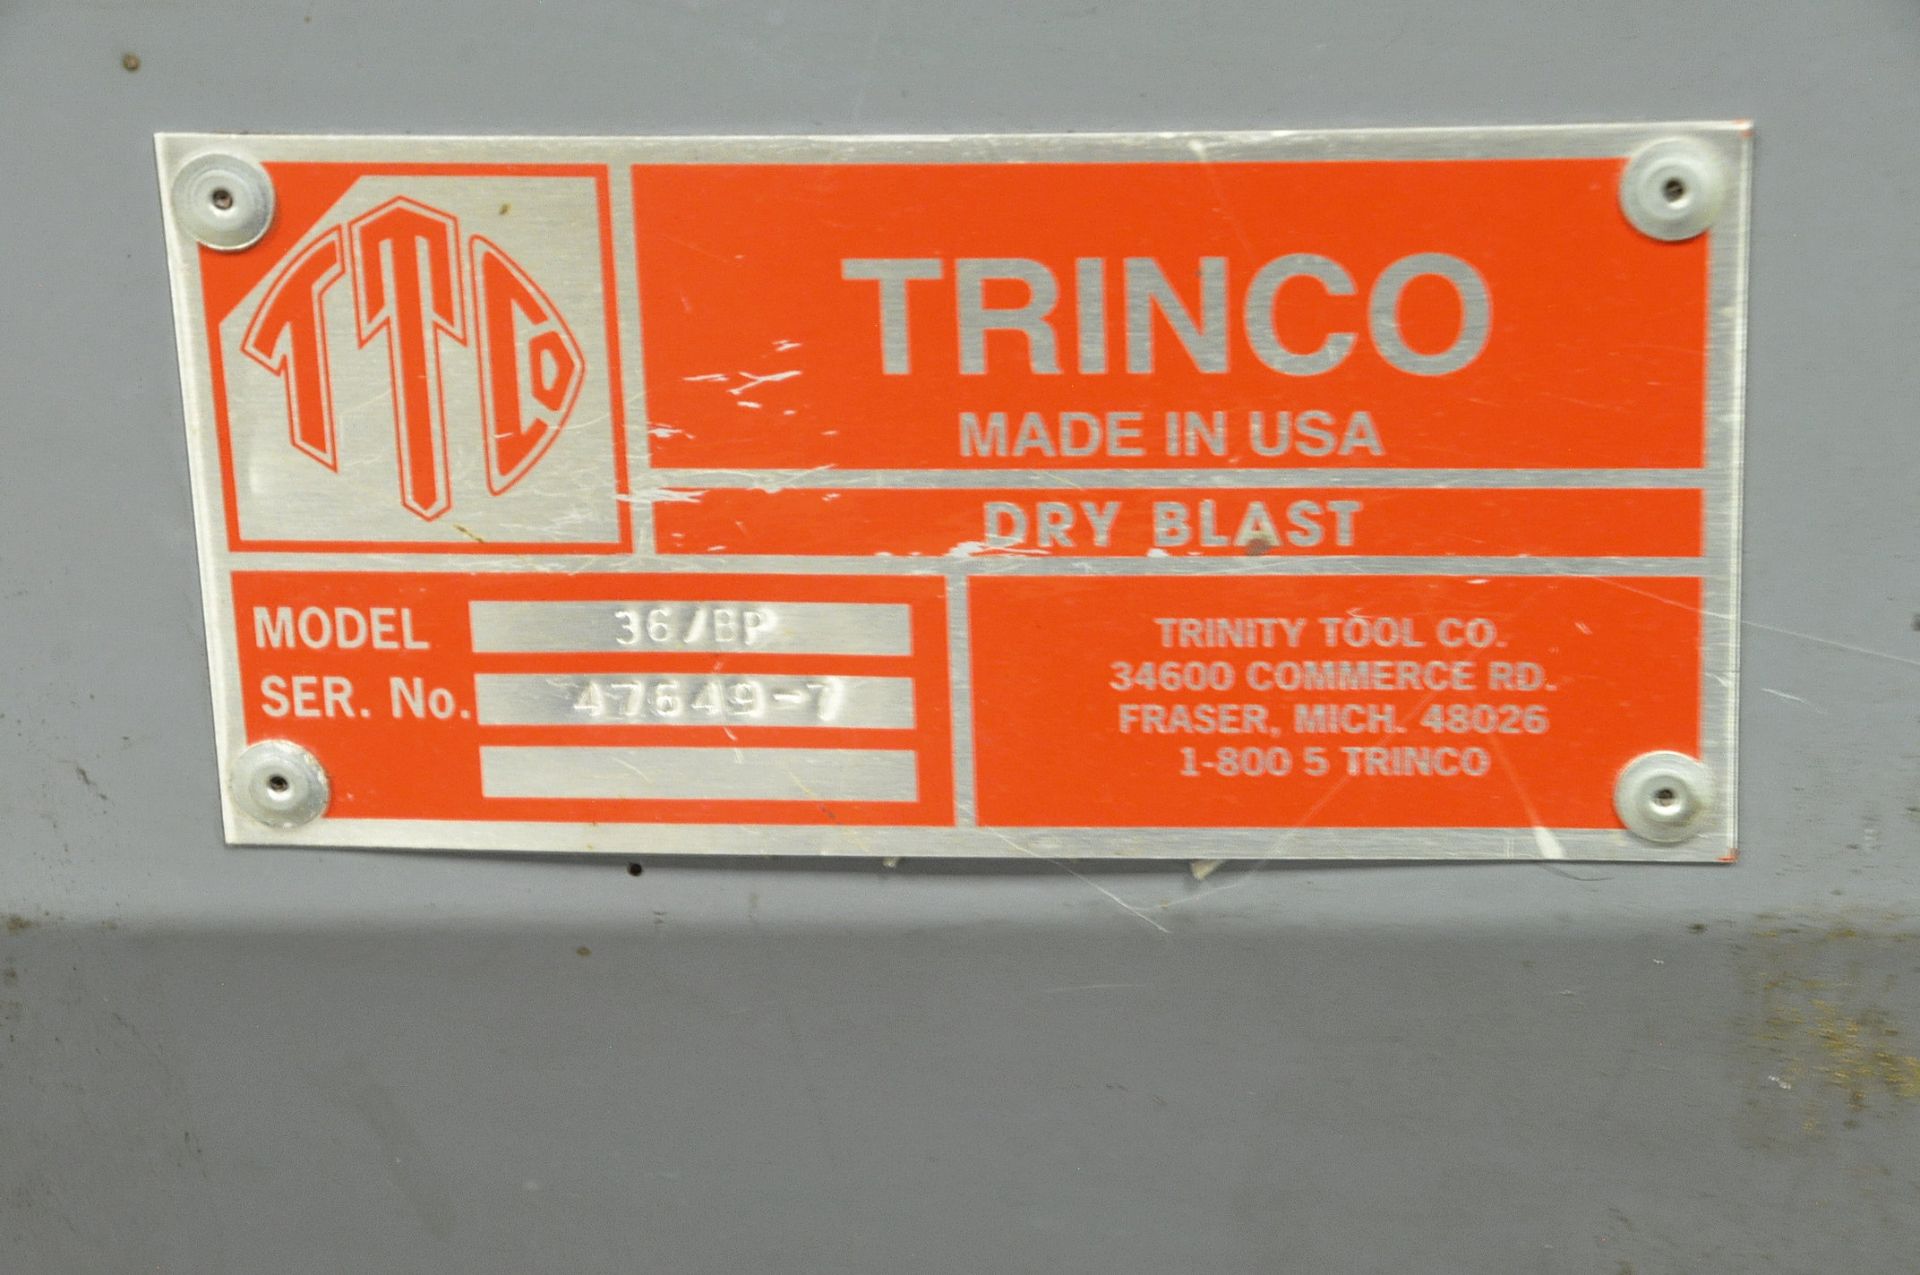 Trinco Model 36/BP, Dry Shot Blast Cabinet, 36" x 24" x 24", Work Light, with Trinco Media Collector - Image 3 of 3